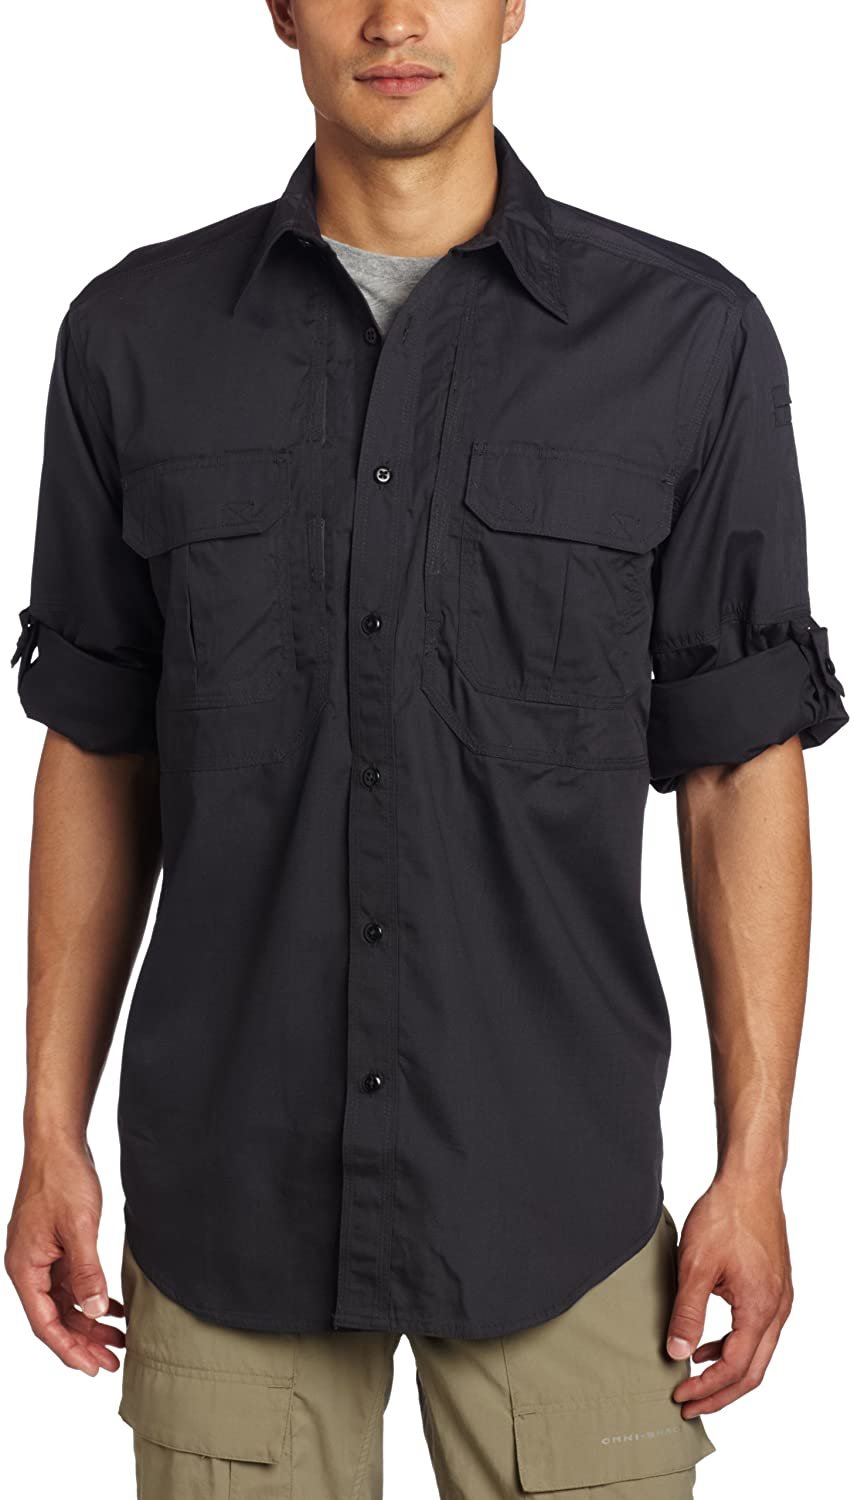 Style 72175 5.11 Tactical Taclite Professional Long-Sleeve Button-Up Work Shirt